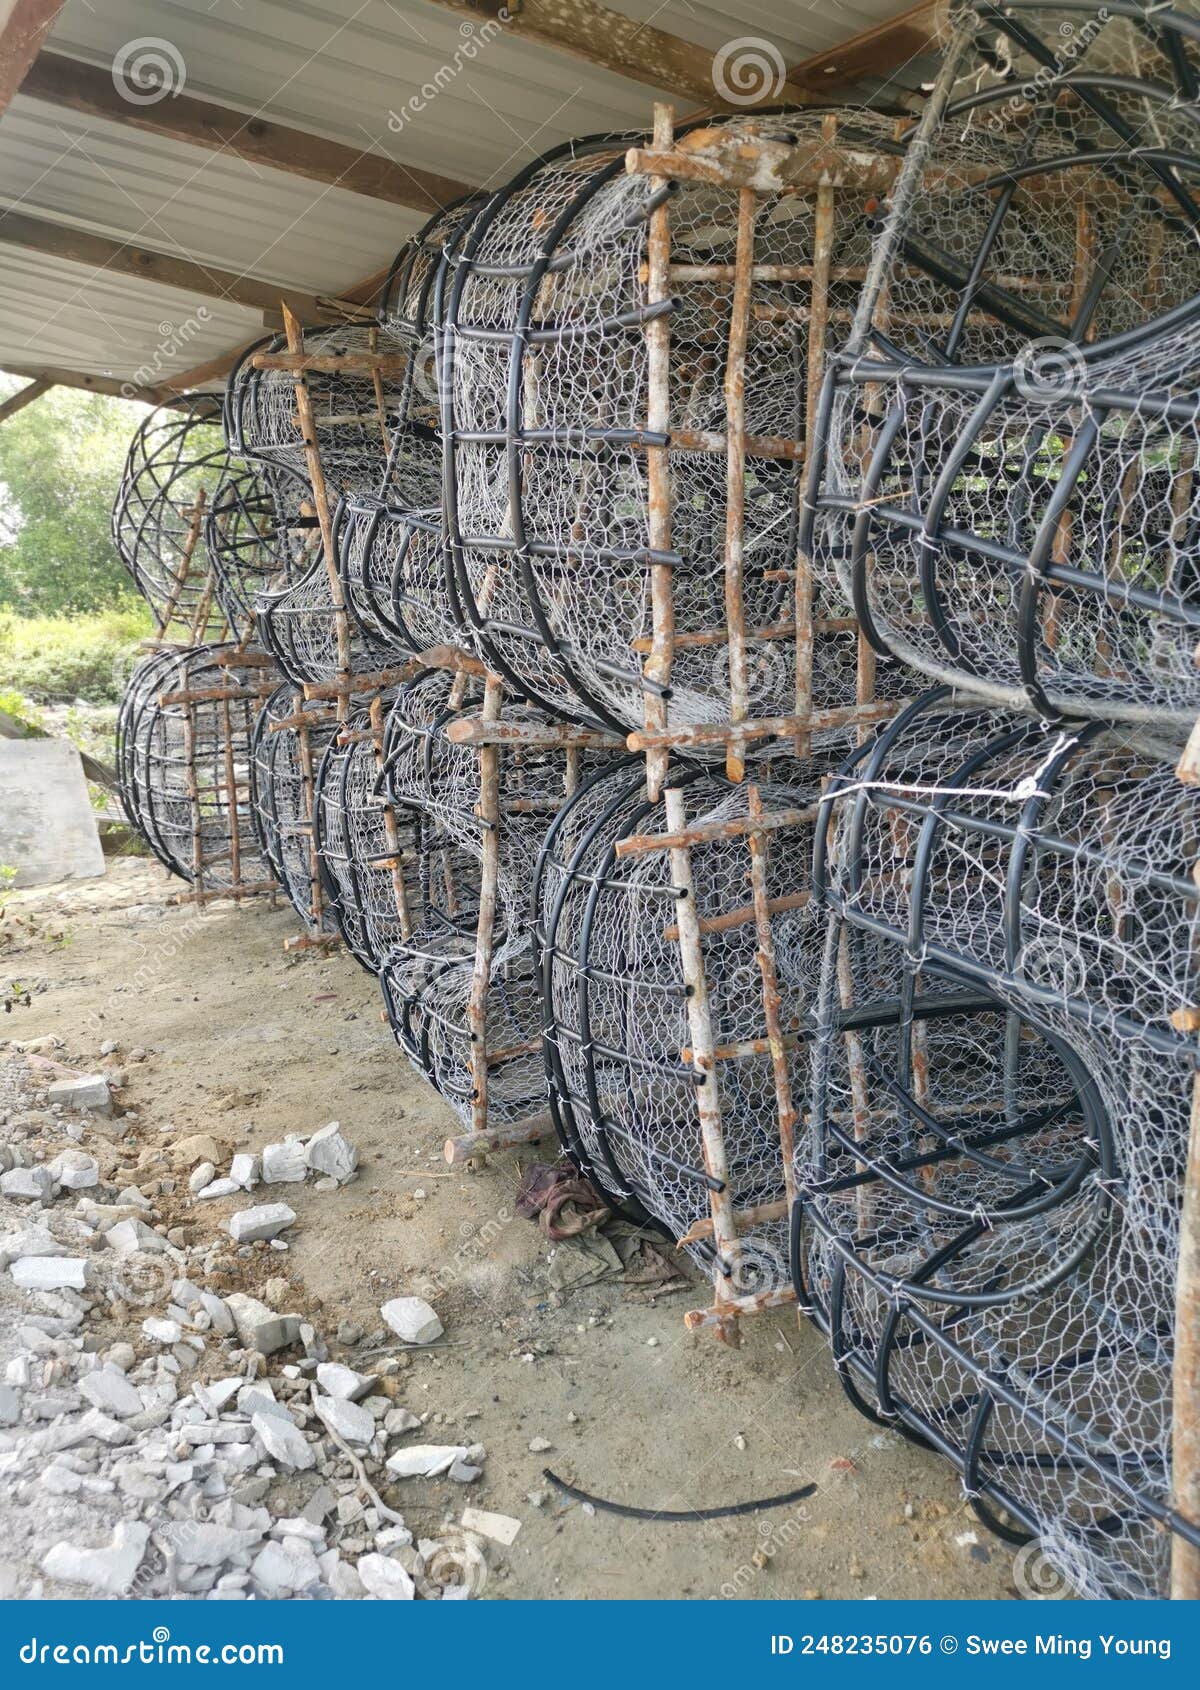 Outdoor Scene of the DIY Fish Trap Structure Make from Mangrove Wood,wire  and Polystyrene Pipe. Stock Photo - Image of fishnet, metallic: 248235076